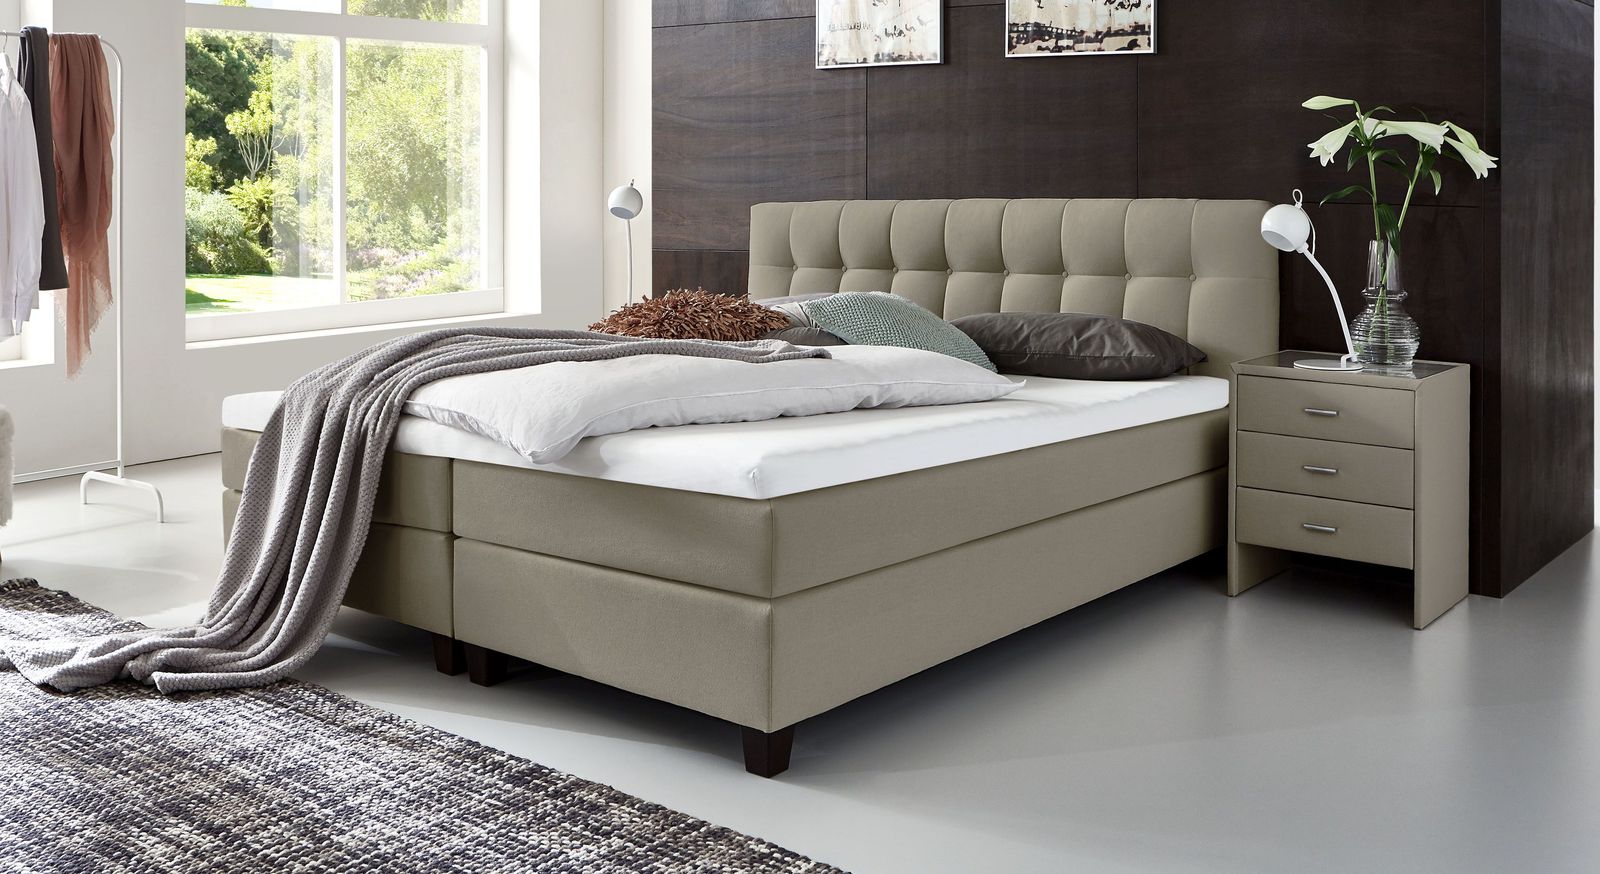 53 cm hohes Boxspringbett Luciano aus Webstoff in Taupe